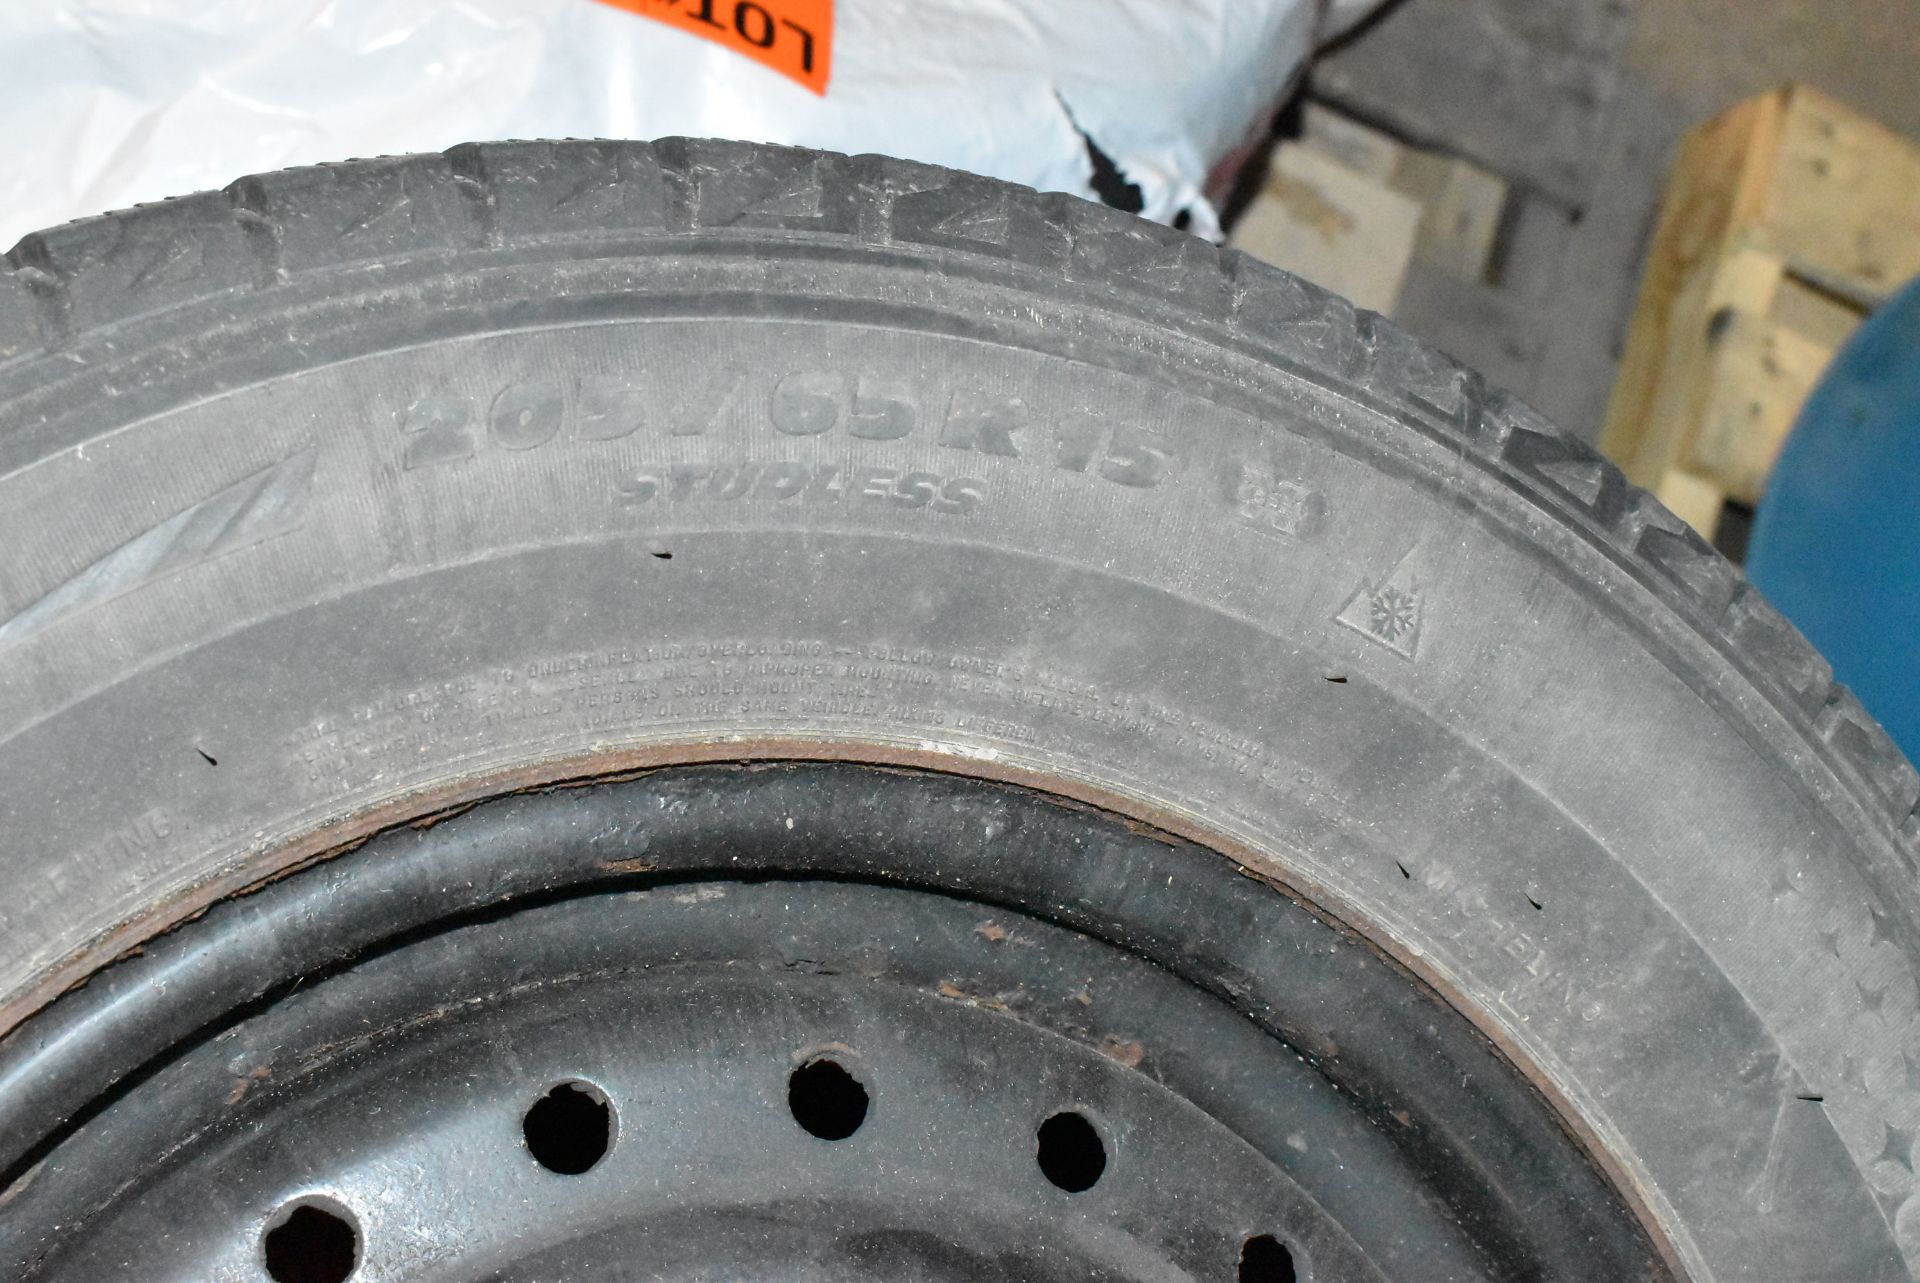 SET OF WINTER TIRES WITH STEEL RIMS - Image 3 of 3